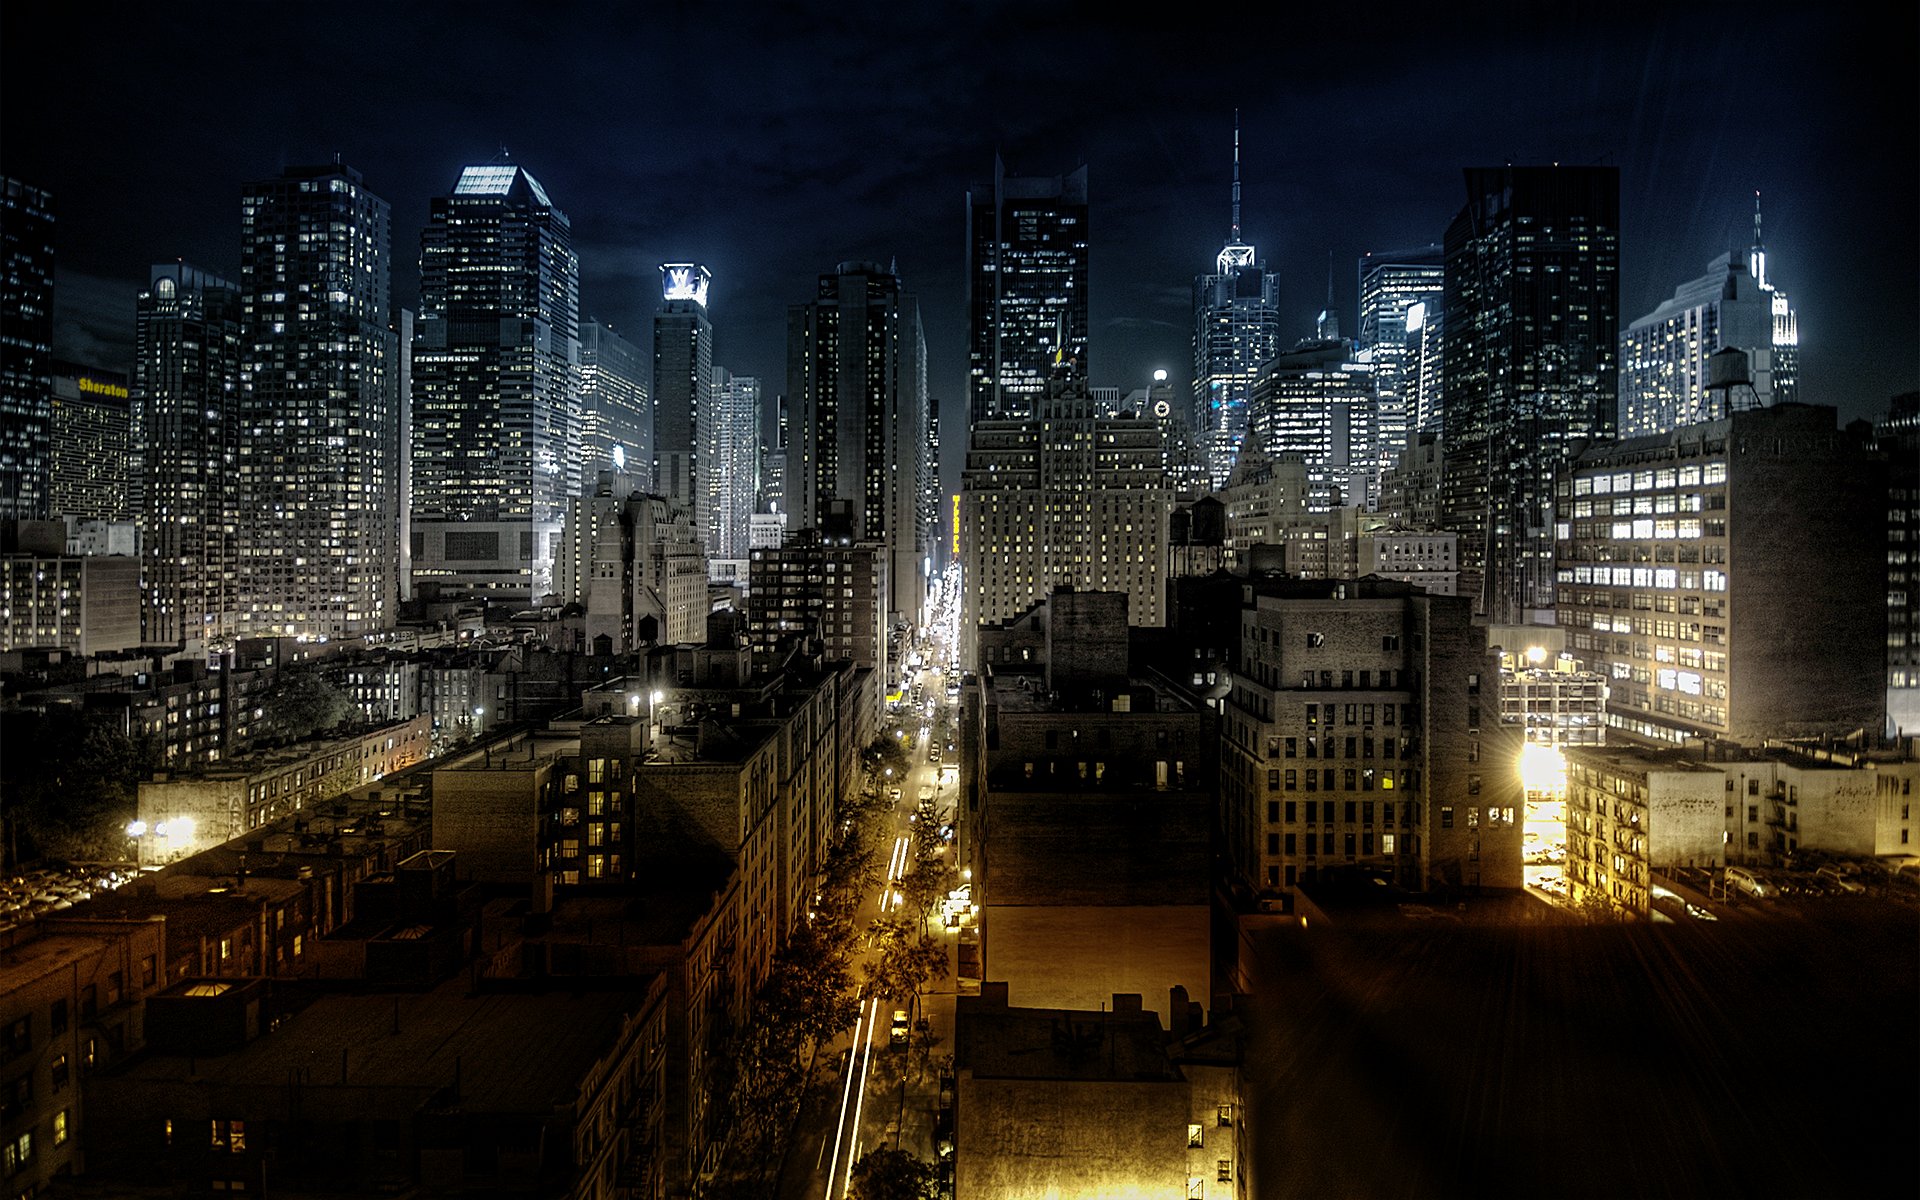 Night city and the skyscrapers wallpaper and image, picture, photo